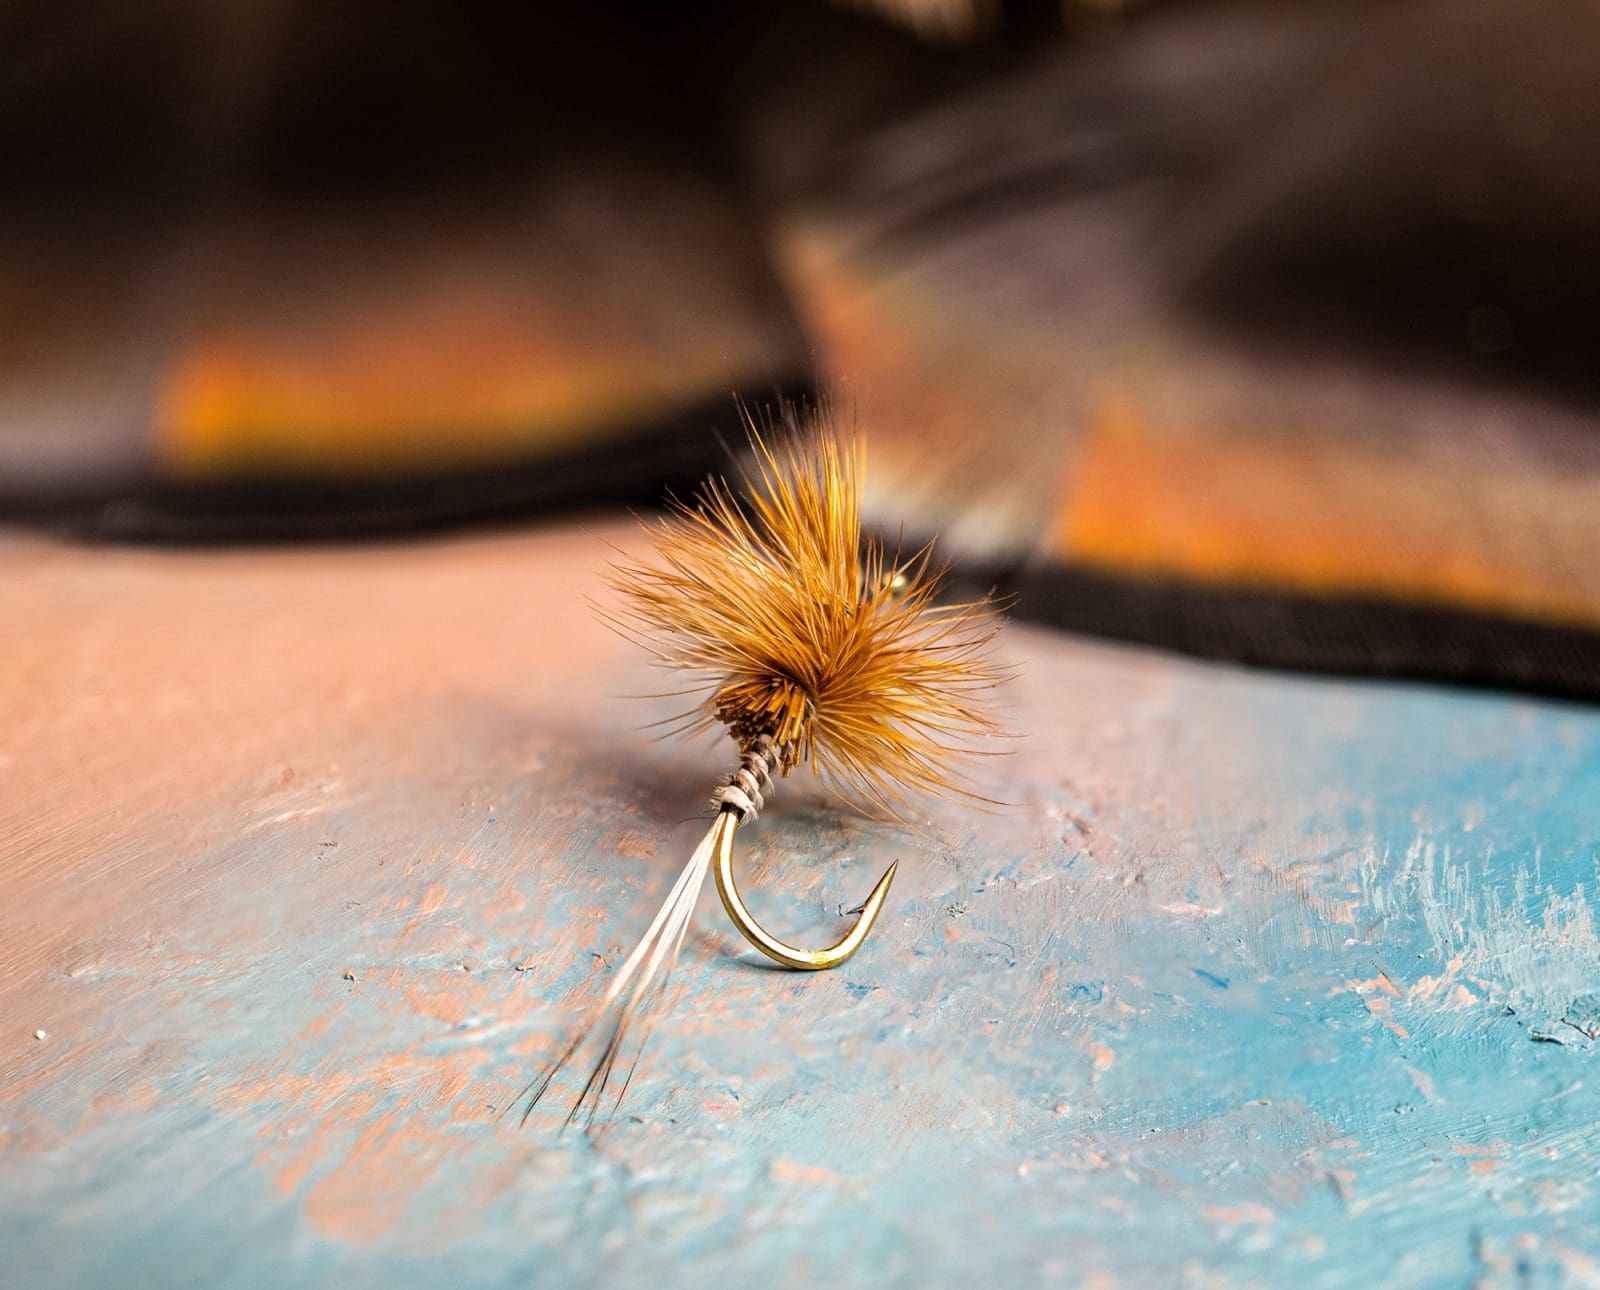 A fly fishing fly made with turkey feathers rests on a table.